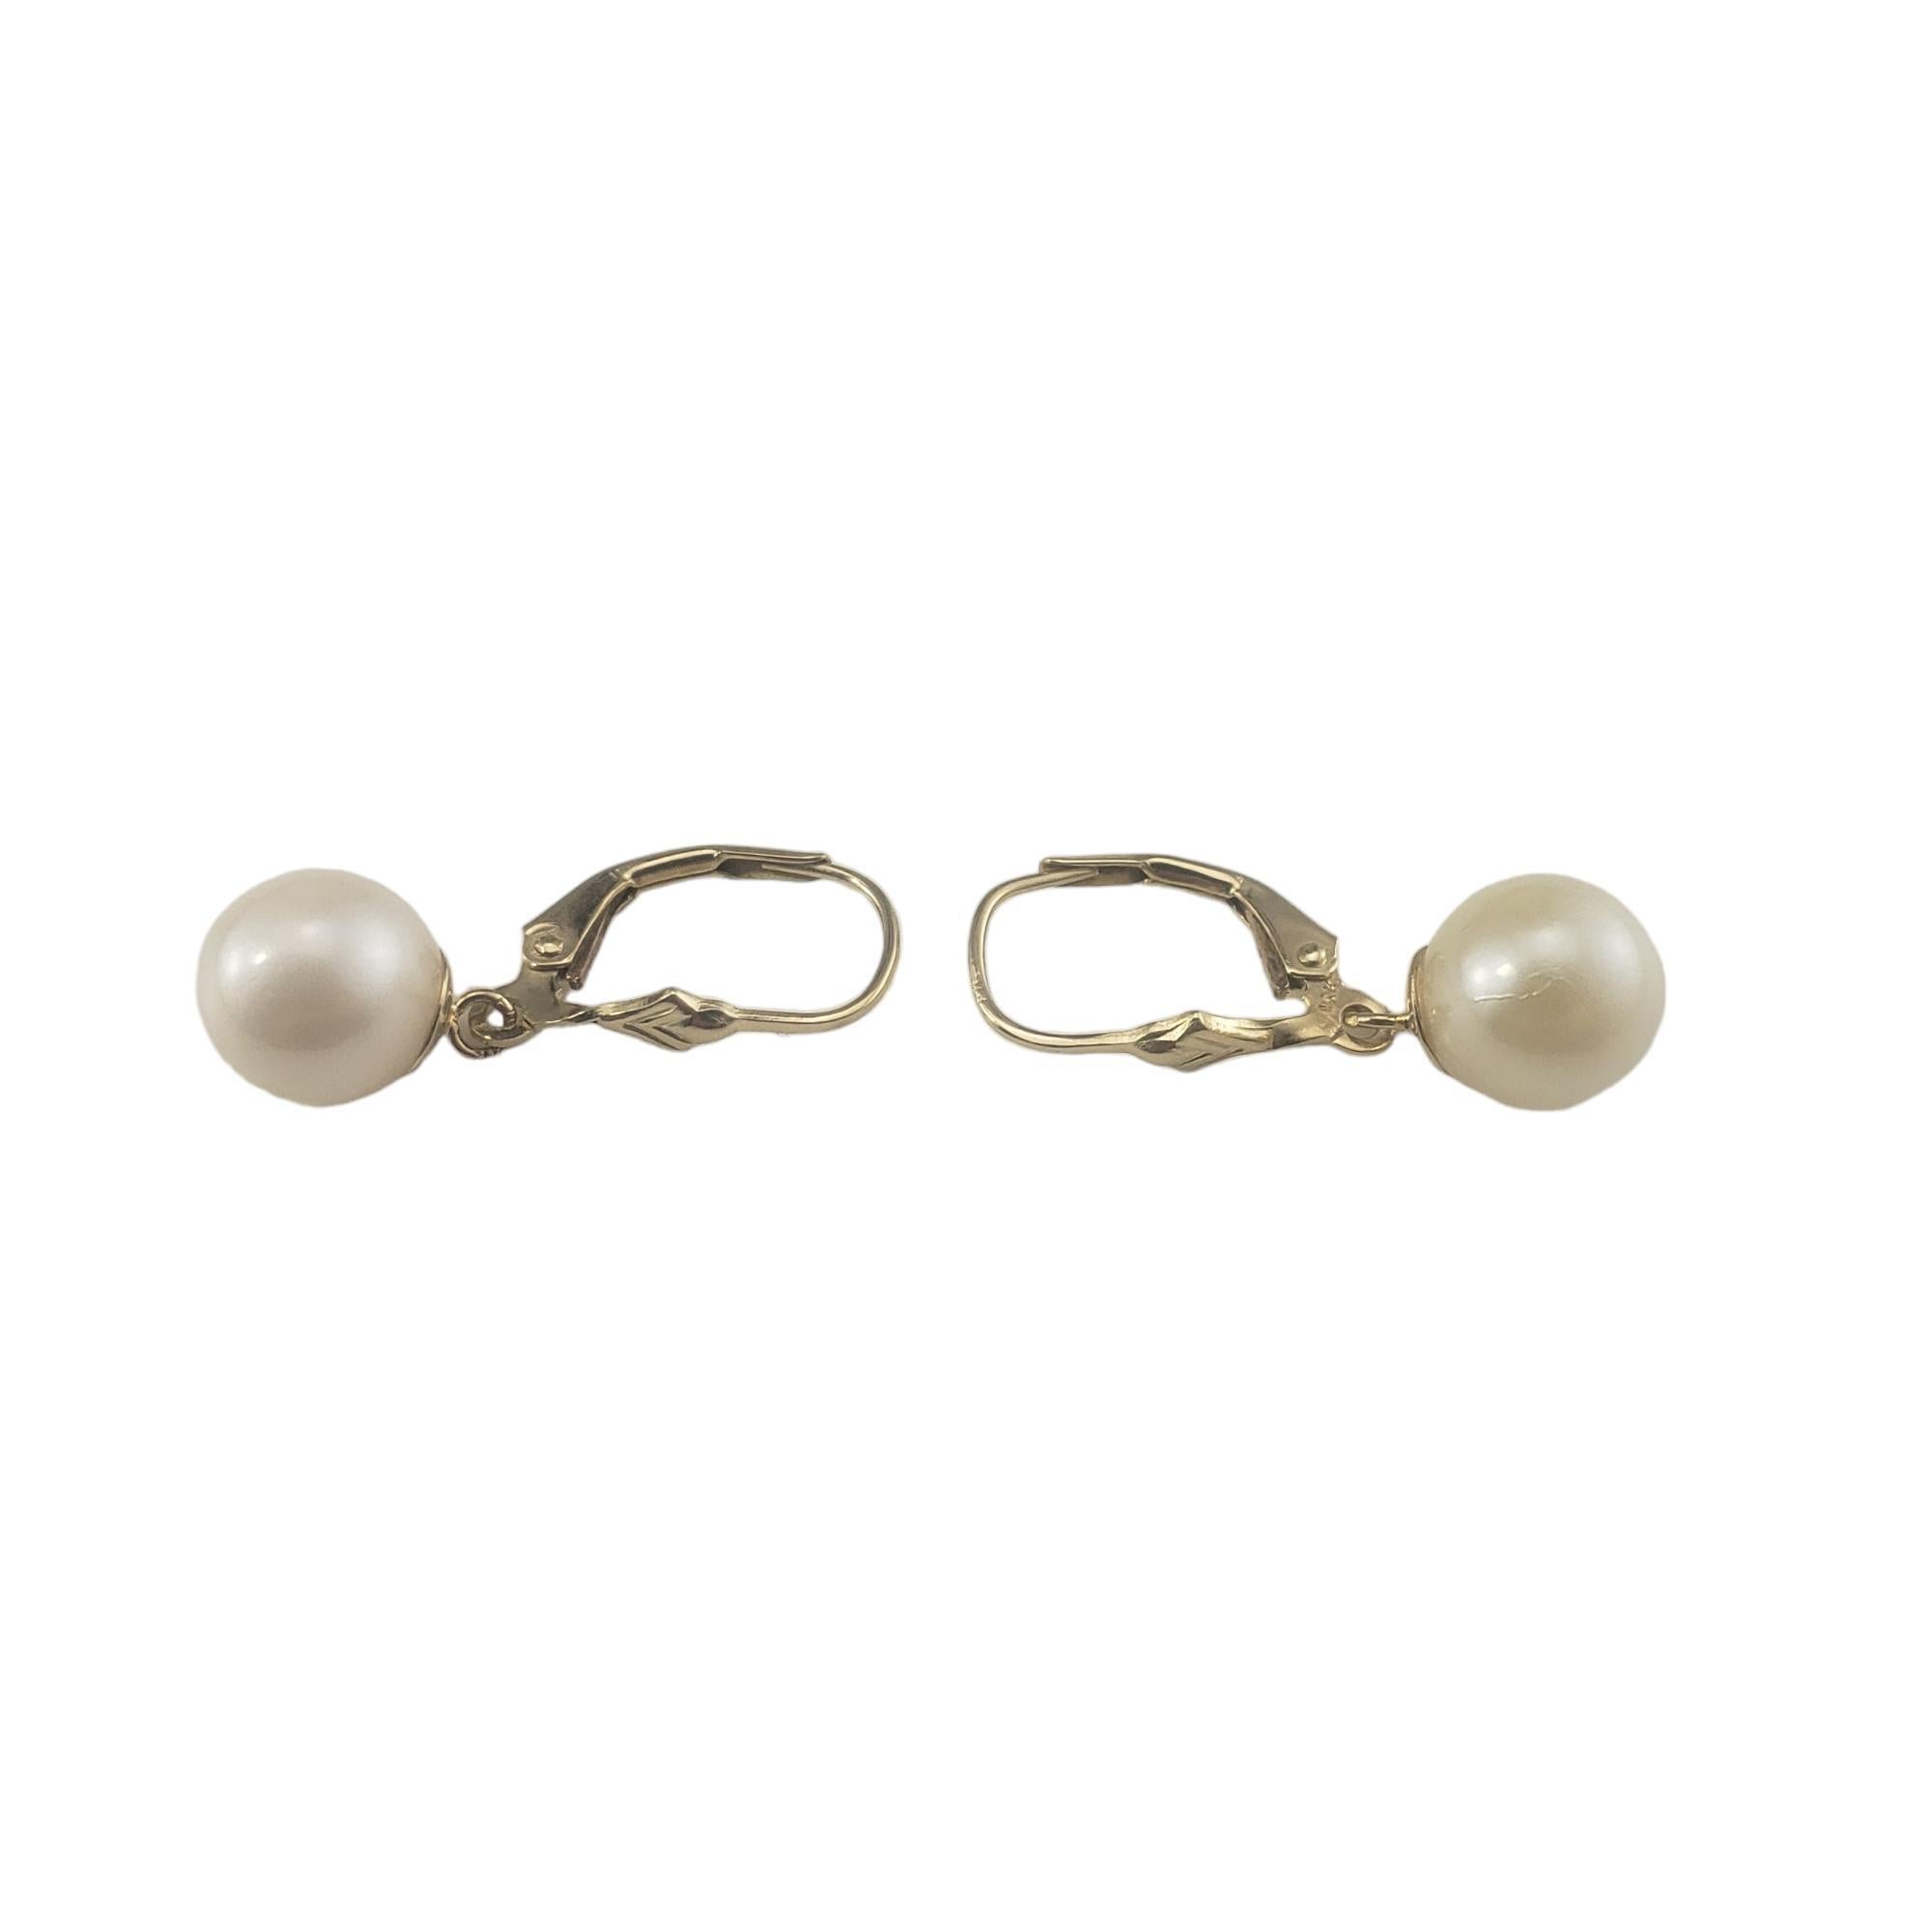 Vintage 14 Karat Yellow Gold Pearl Dangle Earrings-

These elegant earrings each feature one white pearl (9 mm) set in classic 14K yellow gold.  Hinged closures.

Size: 27 mm x 9 mm

Stamped: 14K CL

Weight: 1.7 dwt./ 2.7 gr.

Very good condition,